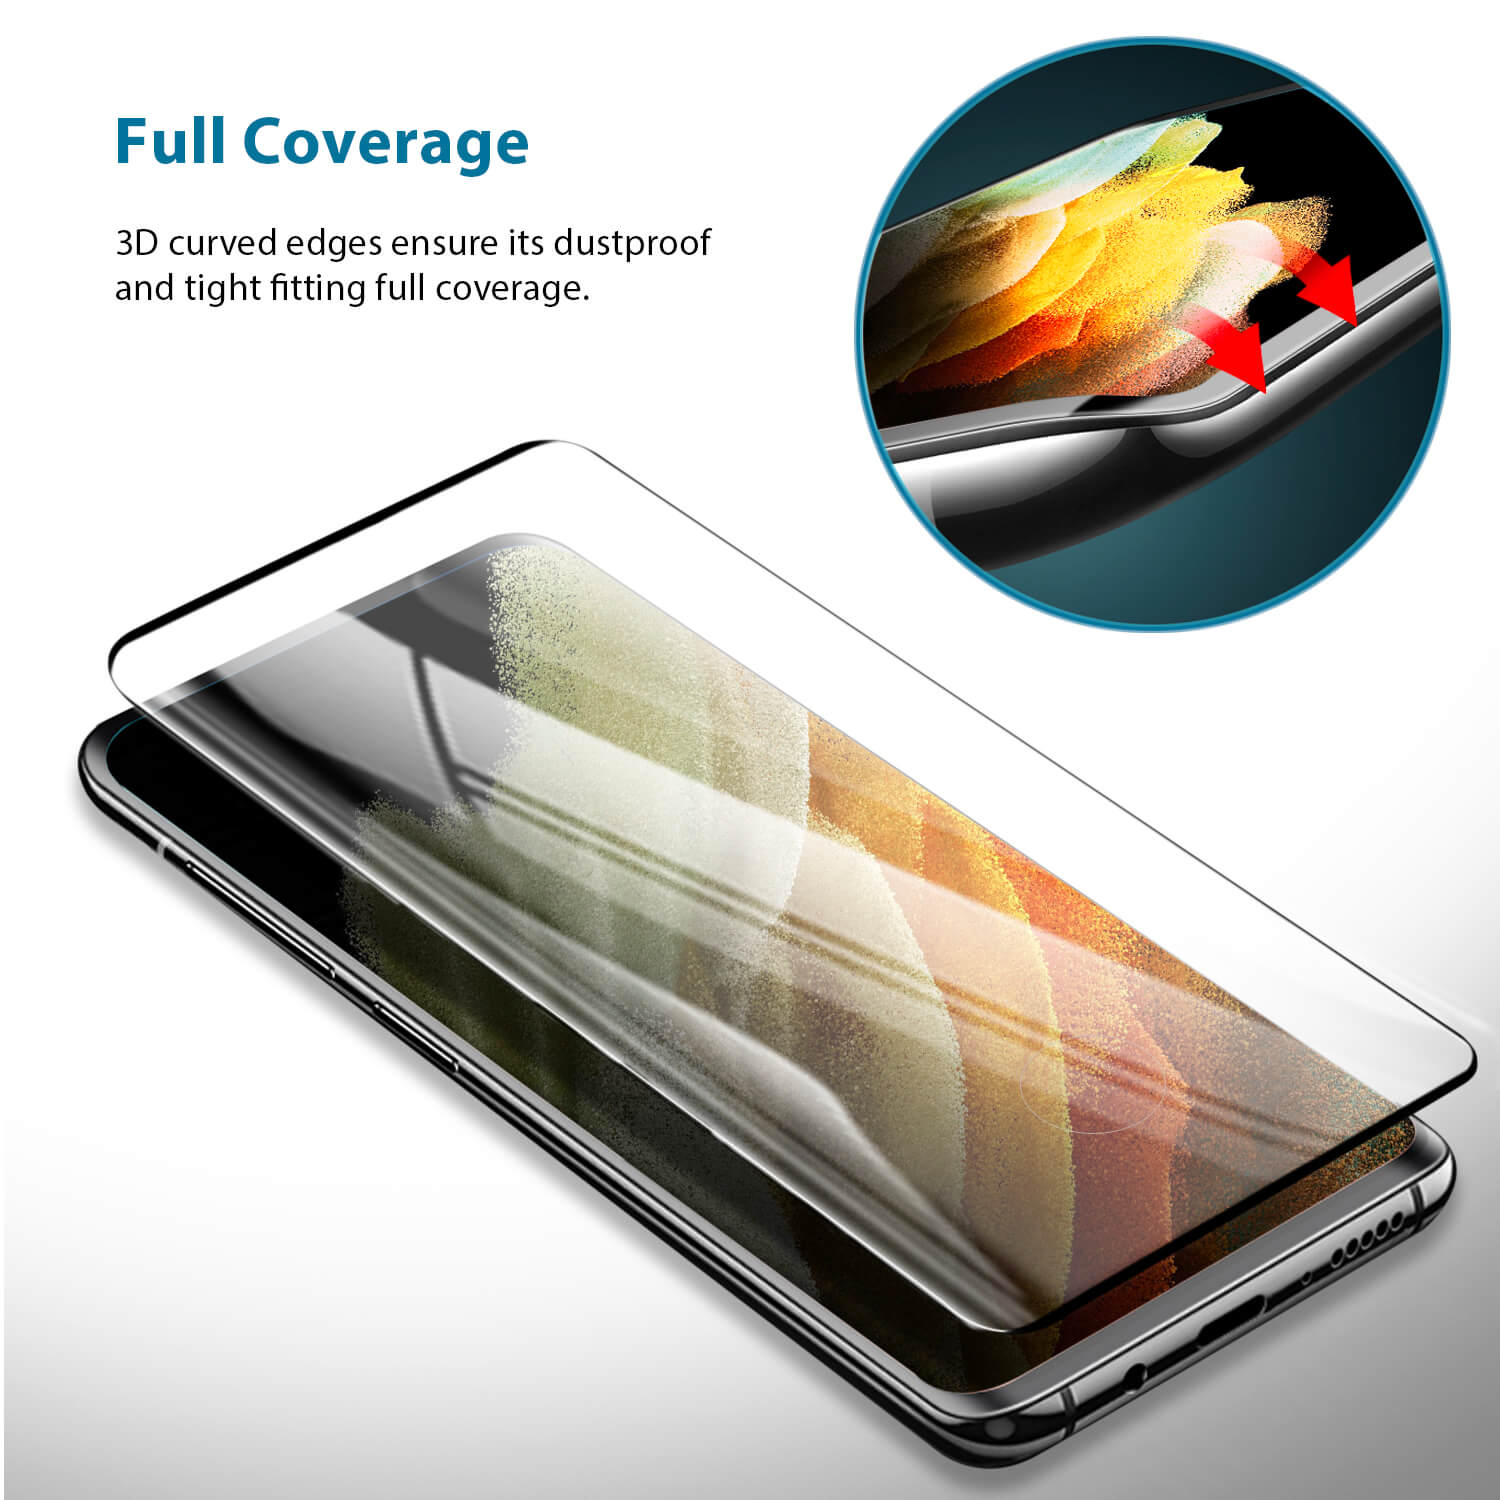 Tough On Samsung Galaxy S21 Ultra 5G Screen Protector 3D Full Cover Glass